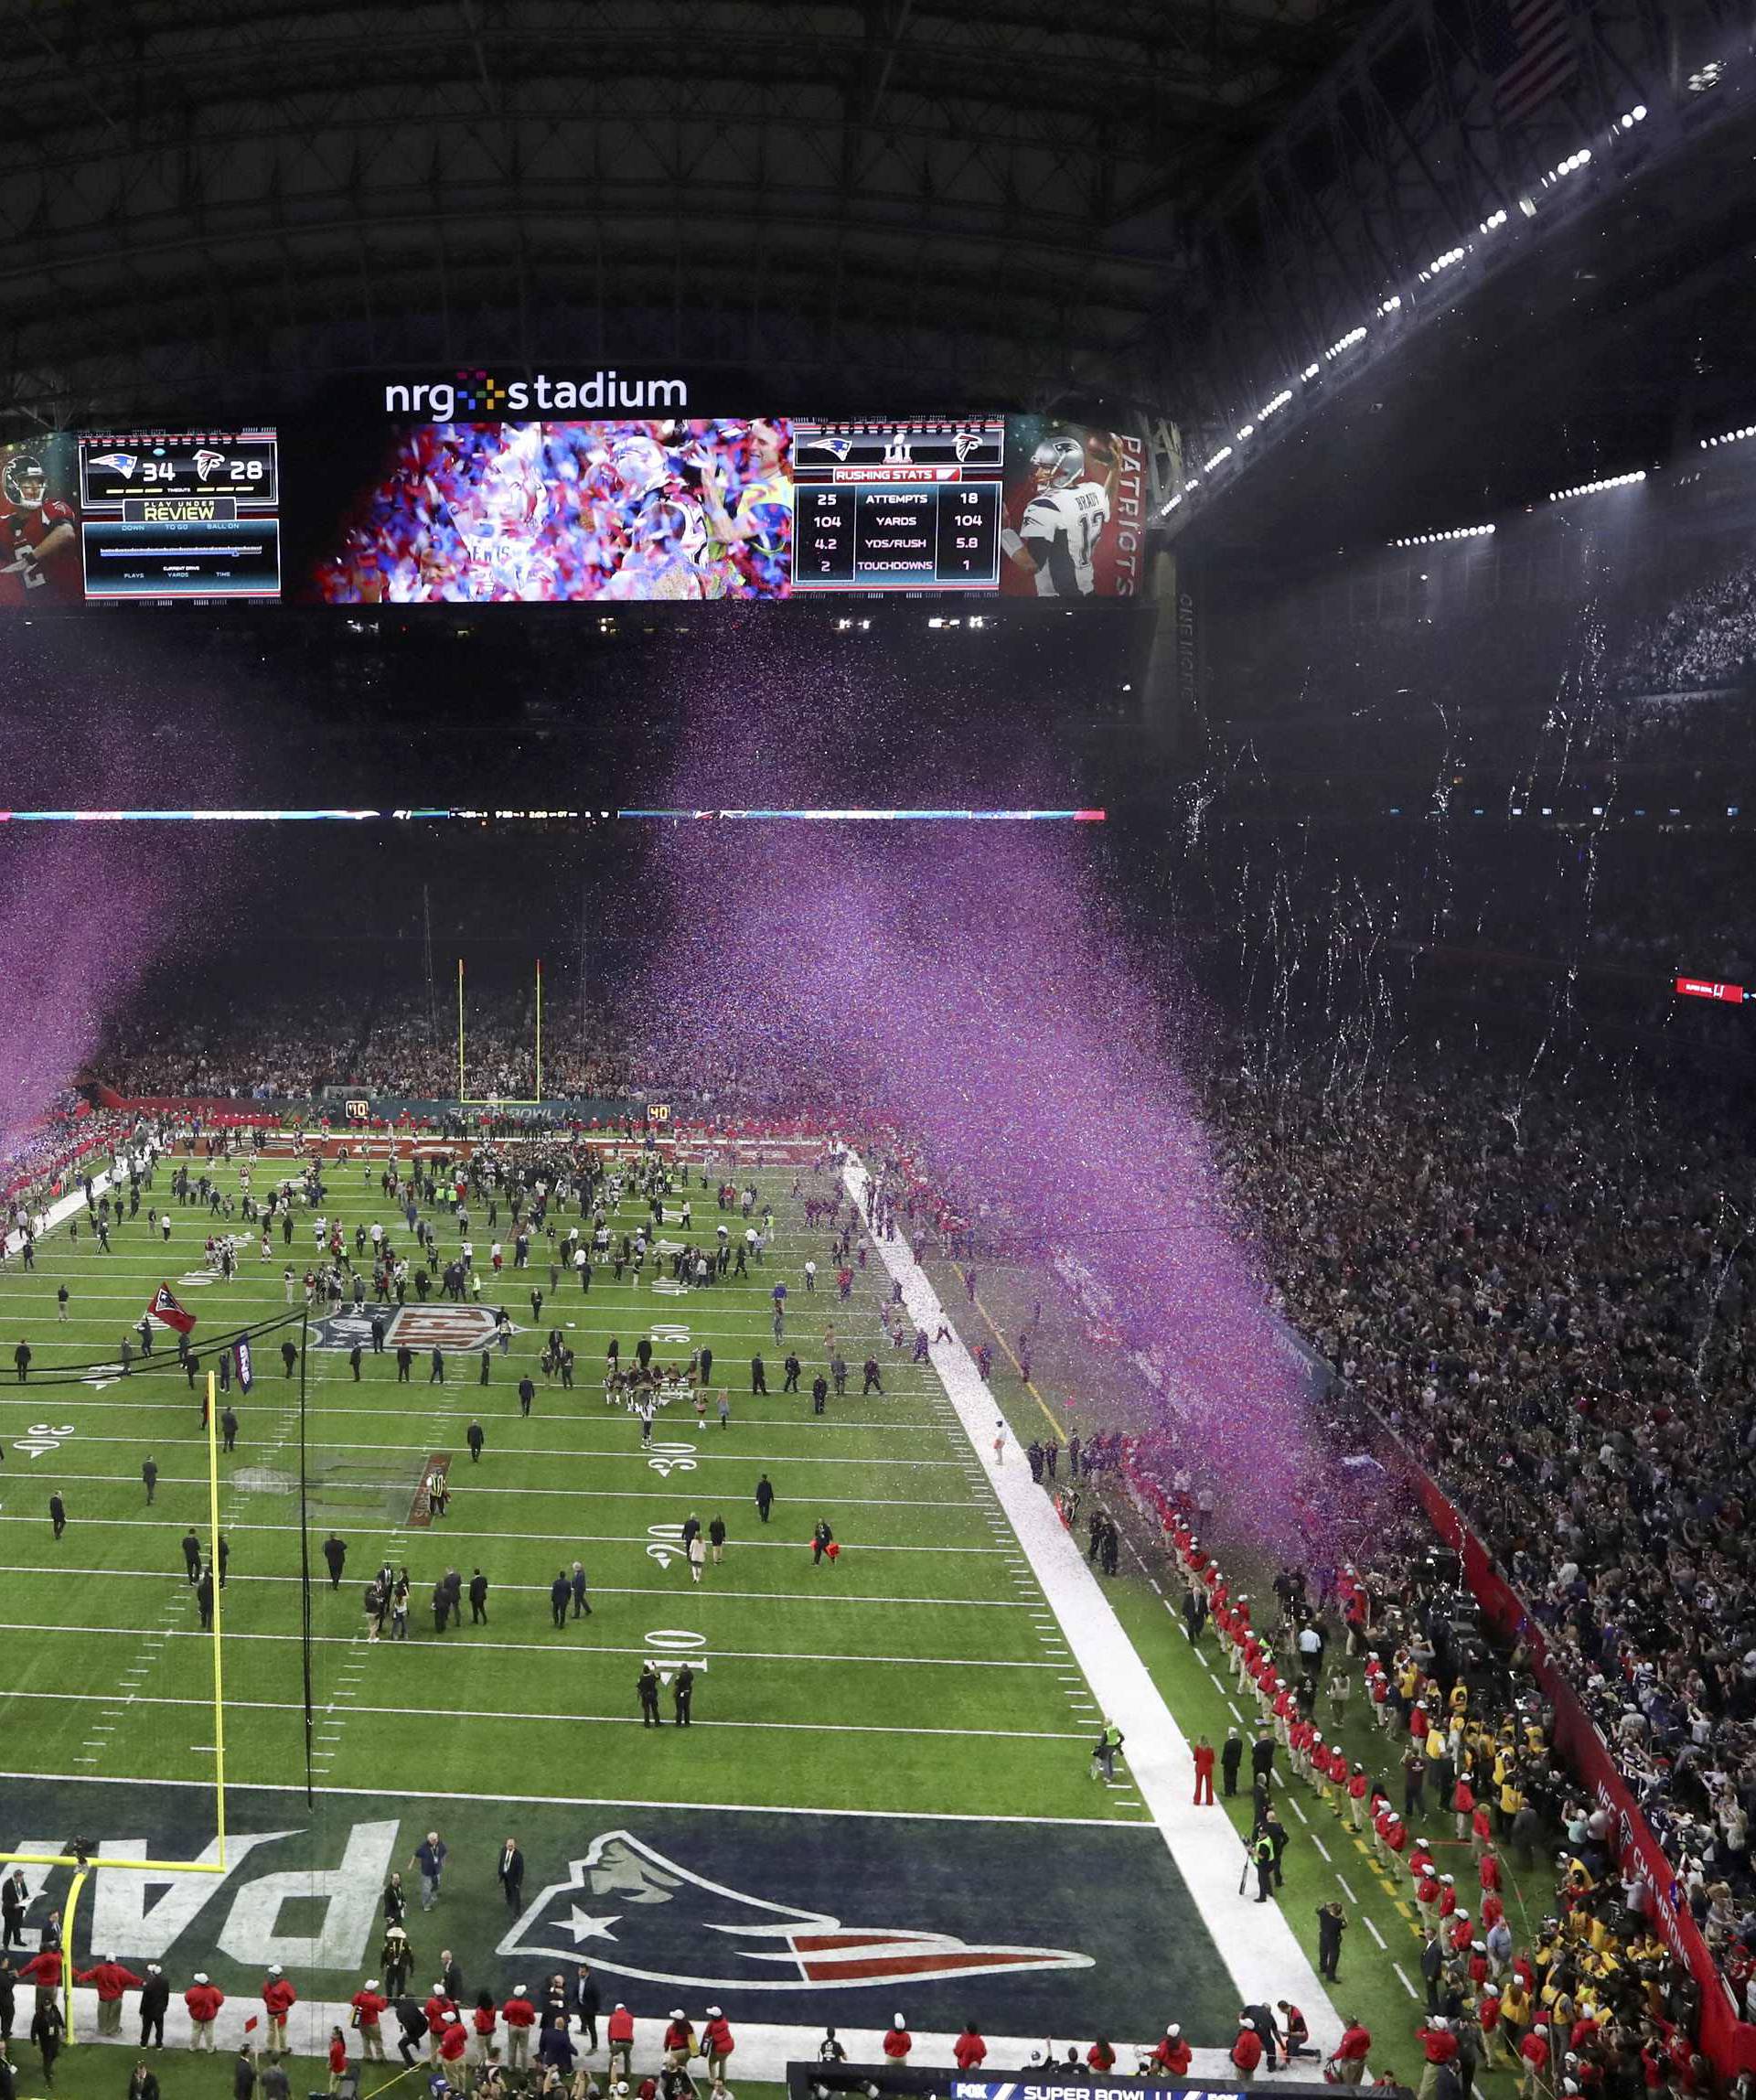 Overall view of the field as confetti sprays into the air after the New England Patriots defeated the Atlanta Falcons to win Super Bowl LI in Houston